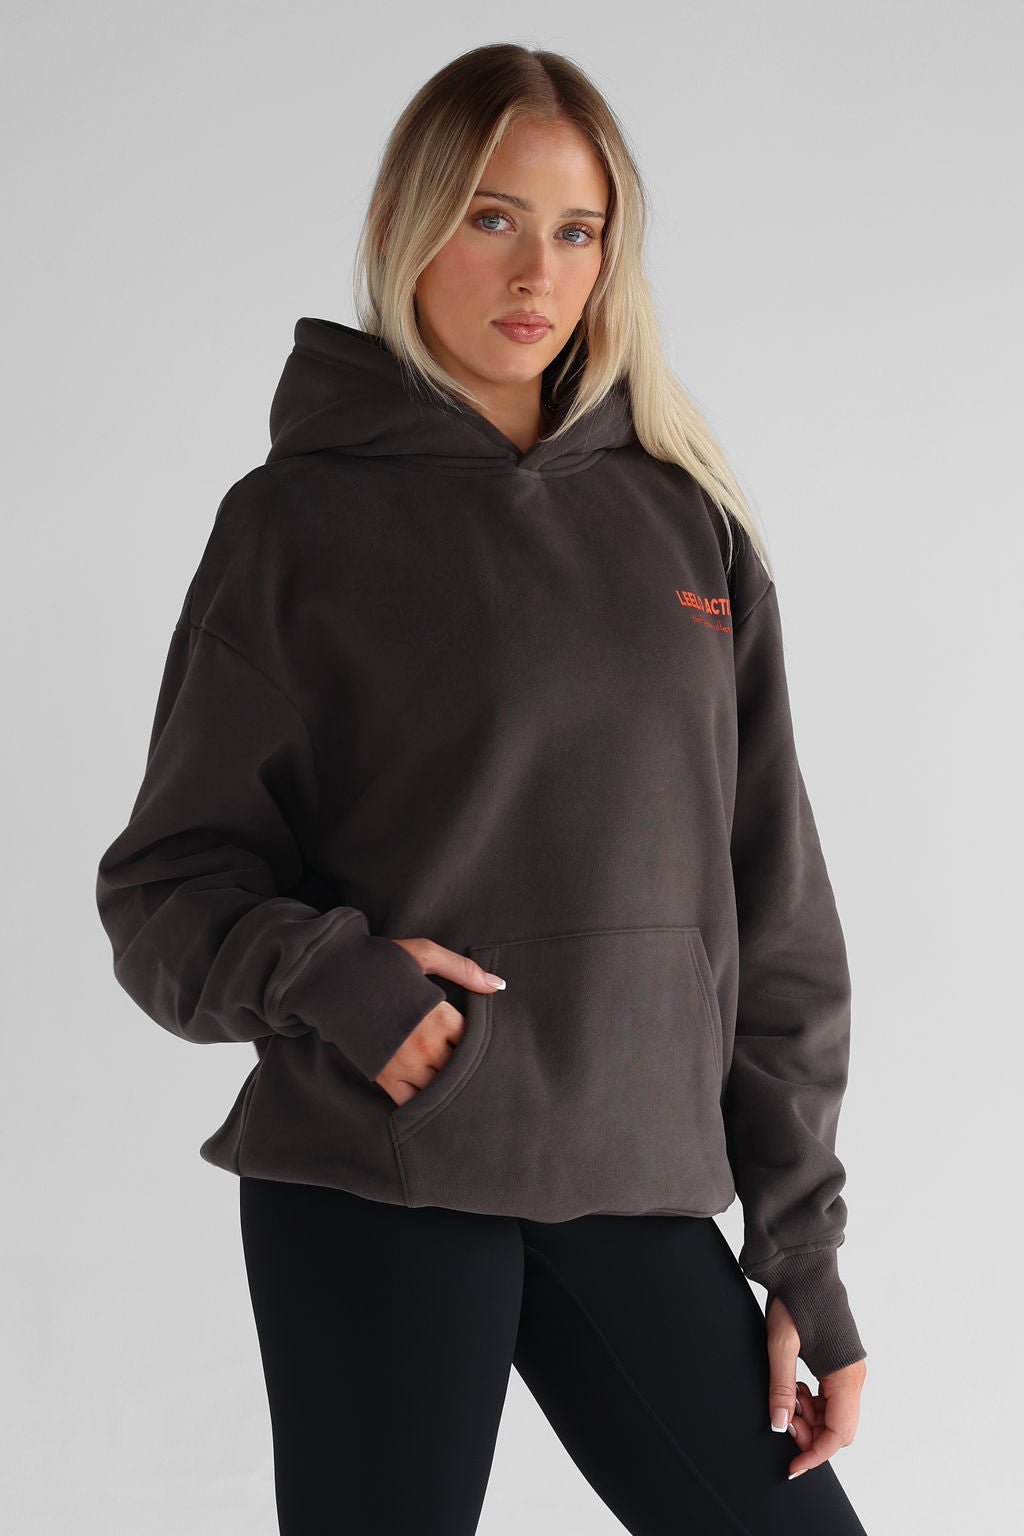 V2 The Pilates Collection Hoodie - Ash - LEELO ACTIVE